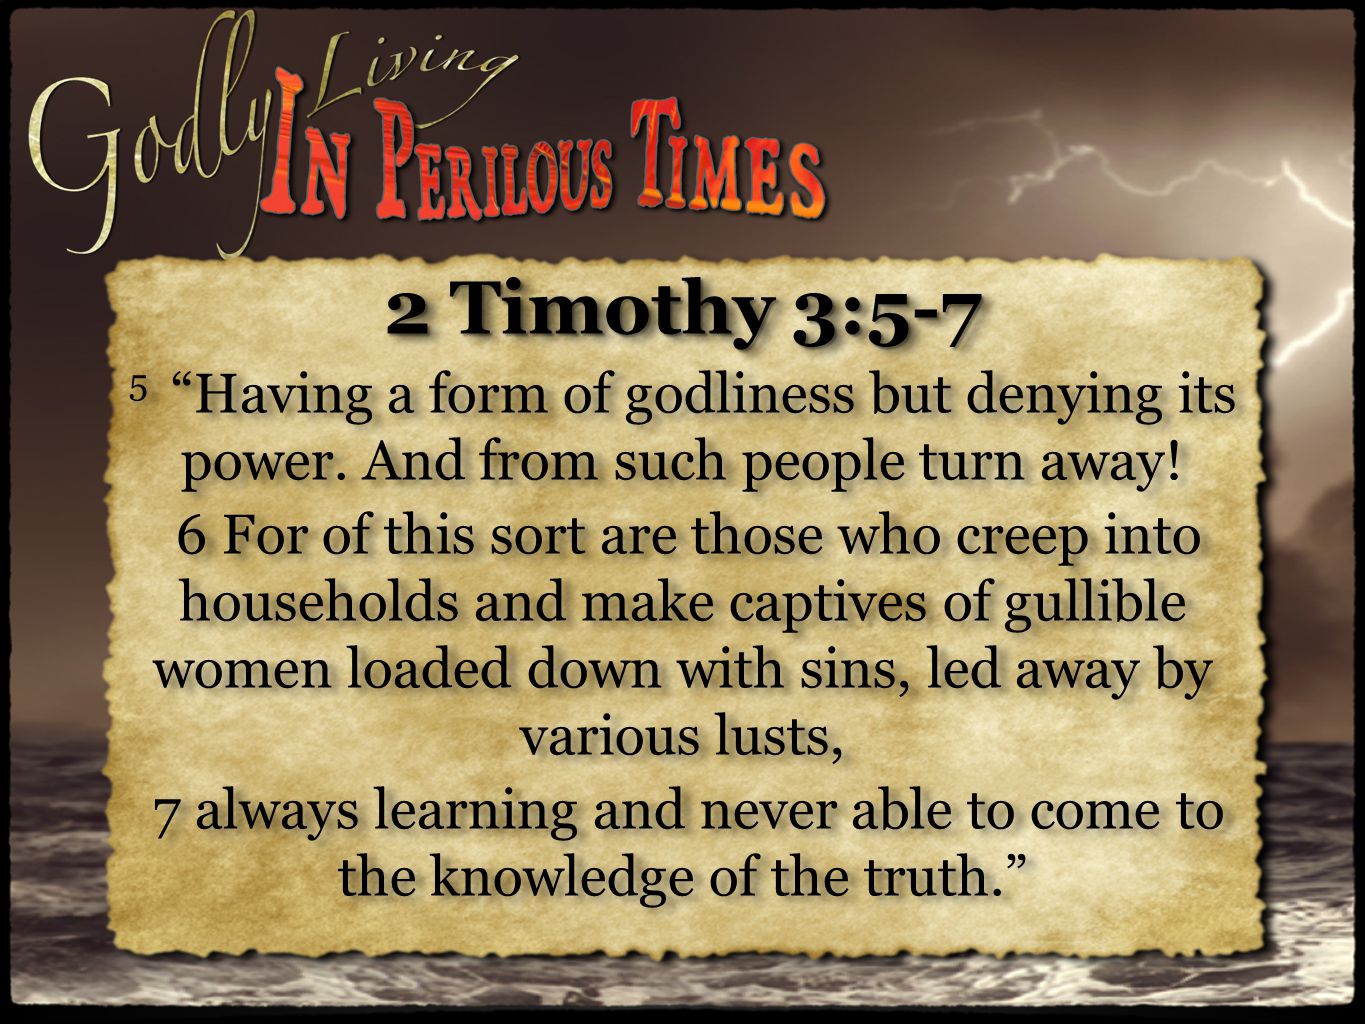 2 Timothy 3:5-7 5 Having a form of godliness but denying its power.